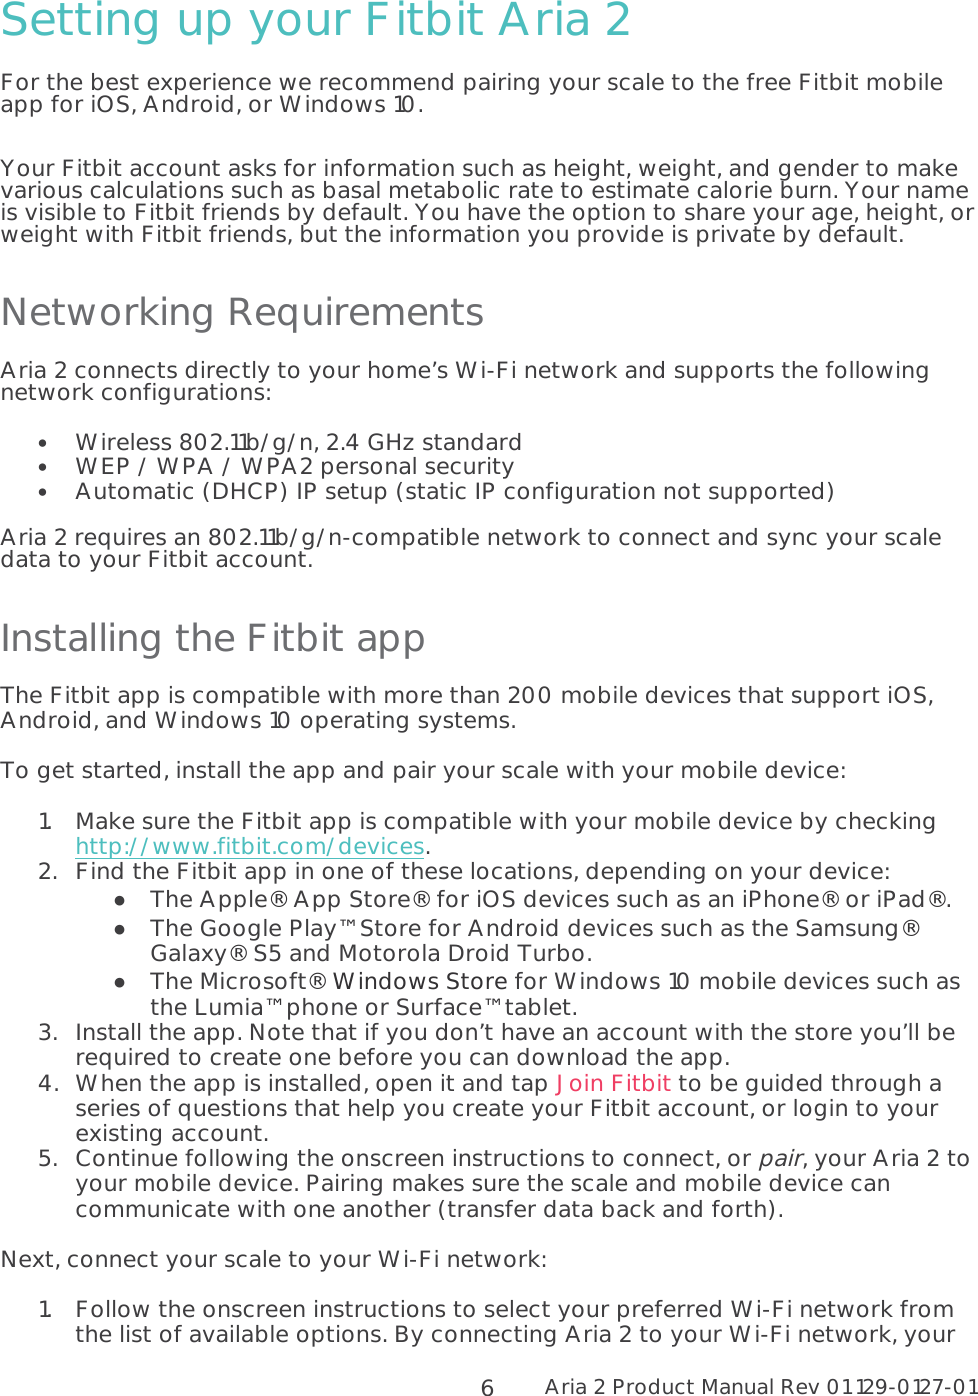 Aria 2 Product Manual Rev 01 129-0127-01  6 Setting up your Fitbit Aria 2 For the best experience we recommend pairing your scale to the free Fitbit mobile app for iOS, Android, or Windows 10.  Your Fitbit account asks for information such as height, weight, and gender to make various calculations such as basal metabolic rate to estimate calorie burn. Your name is visible to Fitbit friends by default. You have the option to share your age, height, or weight with Fitbit friends, but the information you provide is private by default. Networking Requirements Aria 2 connects directly to your home’s Wi-Fi network and supports the following network configurations:  •Wireless 802.11b/g/n, 2.4 GHz standard•WEP / WPA / WPA2 personal security•Automatic (DHCP) IP setup (static IP configuration not supported)Aria 2 requires an 802.11b/g/n-compatible network to connect and sync your scale data to your Fitbit account.   Installing the Fitbit app The Fitbit app is compatible with more than 200 mobile devices that support iOS, Android, and Windows 10 operating systems. To get started, install the app and pair your scale with your mobile device: 1.Make sure the Fitbit app is compatible with your mobile device by checking http://www.fitbit.com/devices. 2.Find the Fitbit app in one of these locations, depending on your device:  The Apple® App Store® for iOS devices such as an iPhone® or iPad®.  The Google Play™ Store for Android devices such as the Samsung® Galaxy® S5 and Motorola Droid Turbo.  The Microsoft® Windows Store for Windows 10 mobile devices such as the Lumia™ phone or Surface™ tablet. 3.Install the app. Note that if you don’t have an account with the store you’ll be required to create one before you can download the app. 4.When the app is installed, open it and tap Join Fitbit to be guided through a series of questions that help you create your Fitbit account, or login to your existing account. 5.Continue following the onscreen instructions to connect, or pair, your Aria 2 to your mobile device. Pairing makes sure the scale and mobile device can communicate with one another (transfer data back and forth). Next, connect your scale to your Wi-Fi network: 1.Follow the onscreen instructions to select your preferred Wi-Fi network from the list of available options. By connecting Aria 2 to your Wi-Fi network, your 